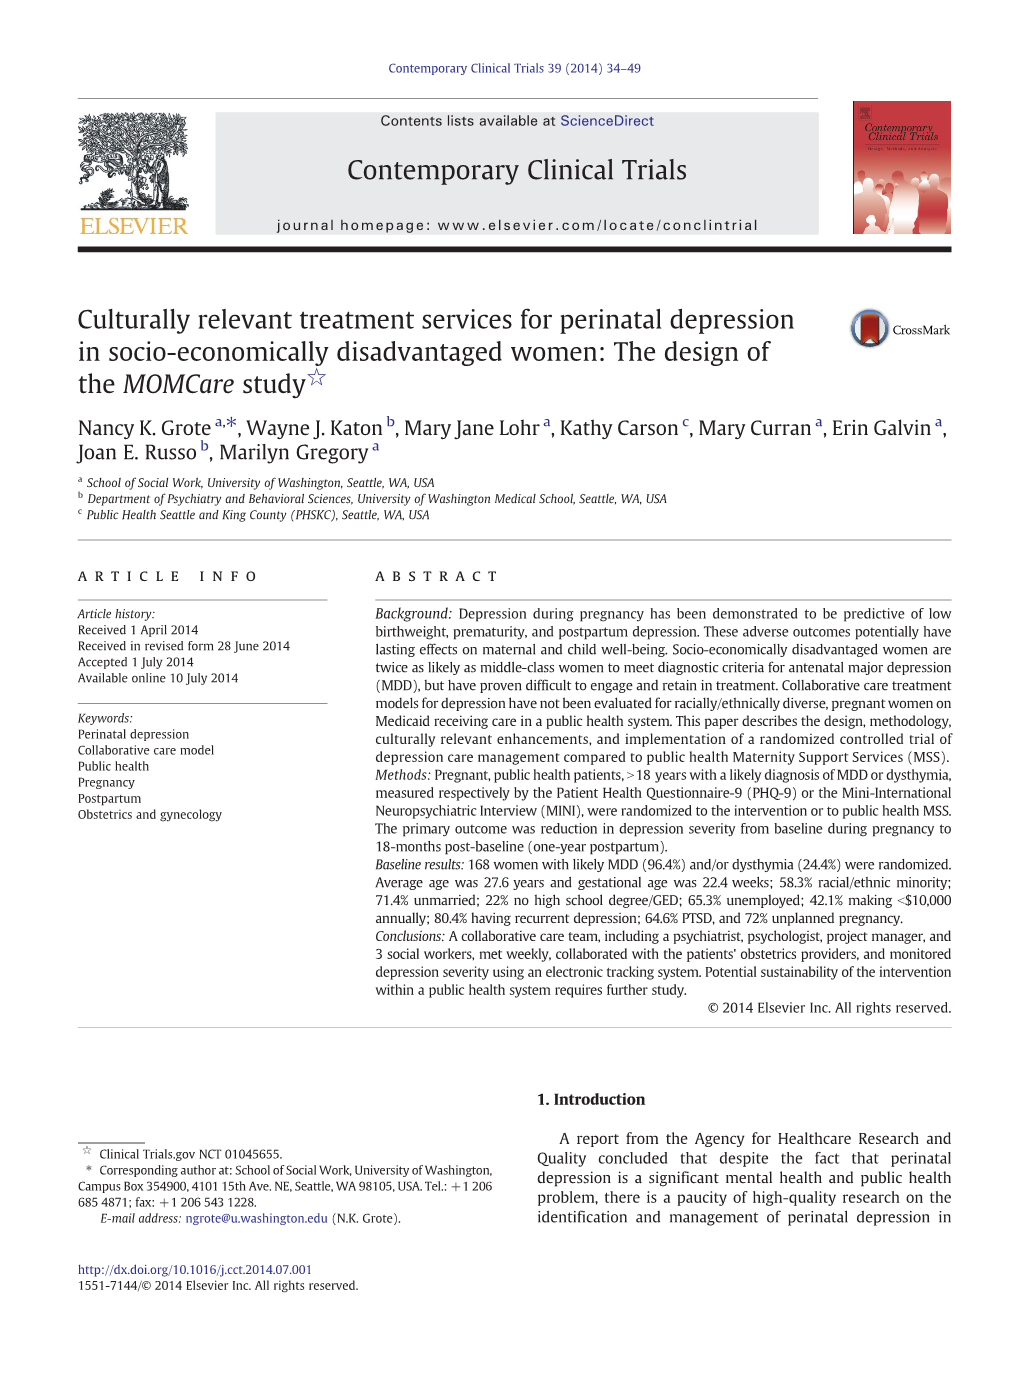 Culturally Relevant Treatment Services for Perinatal Depression in Socio-Economically Disadvantaged Women: the Design of the Momcare Study☆